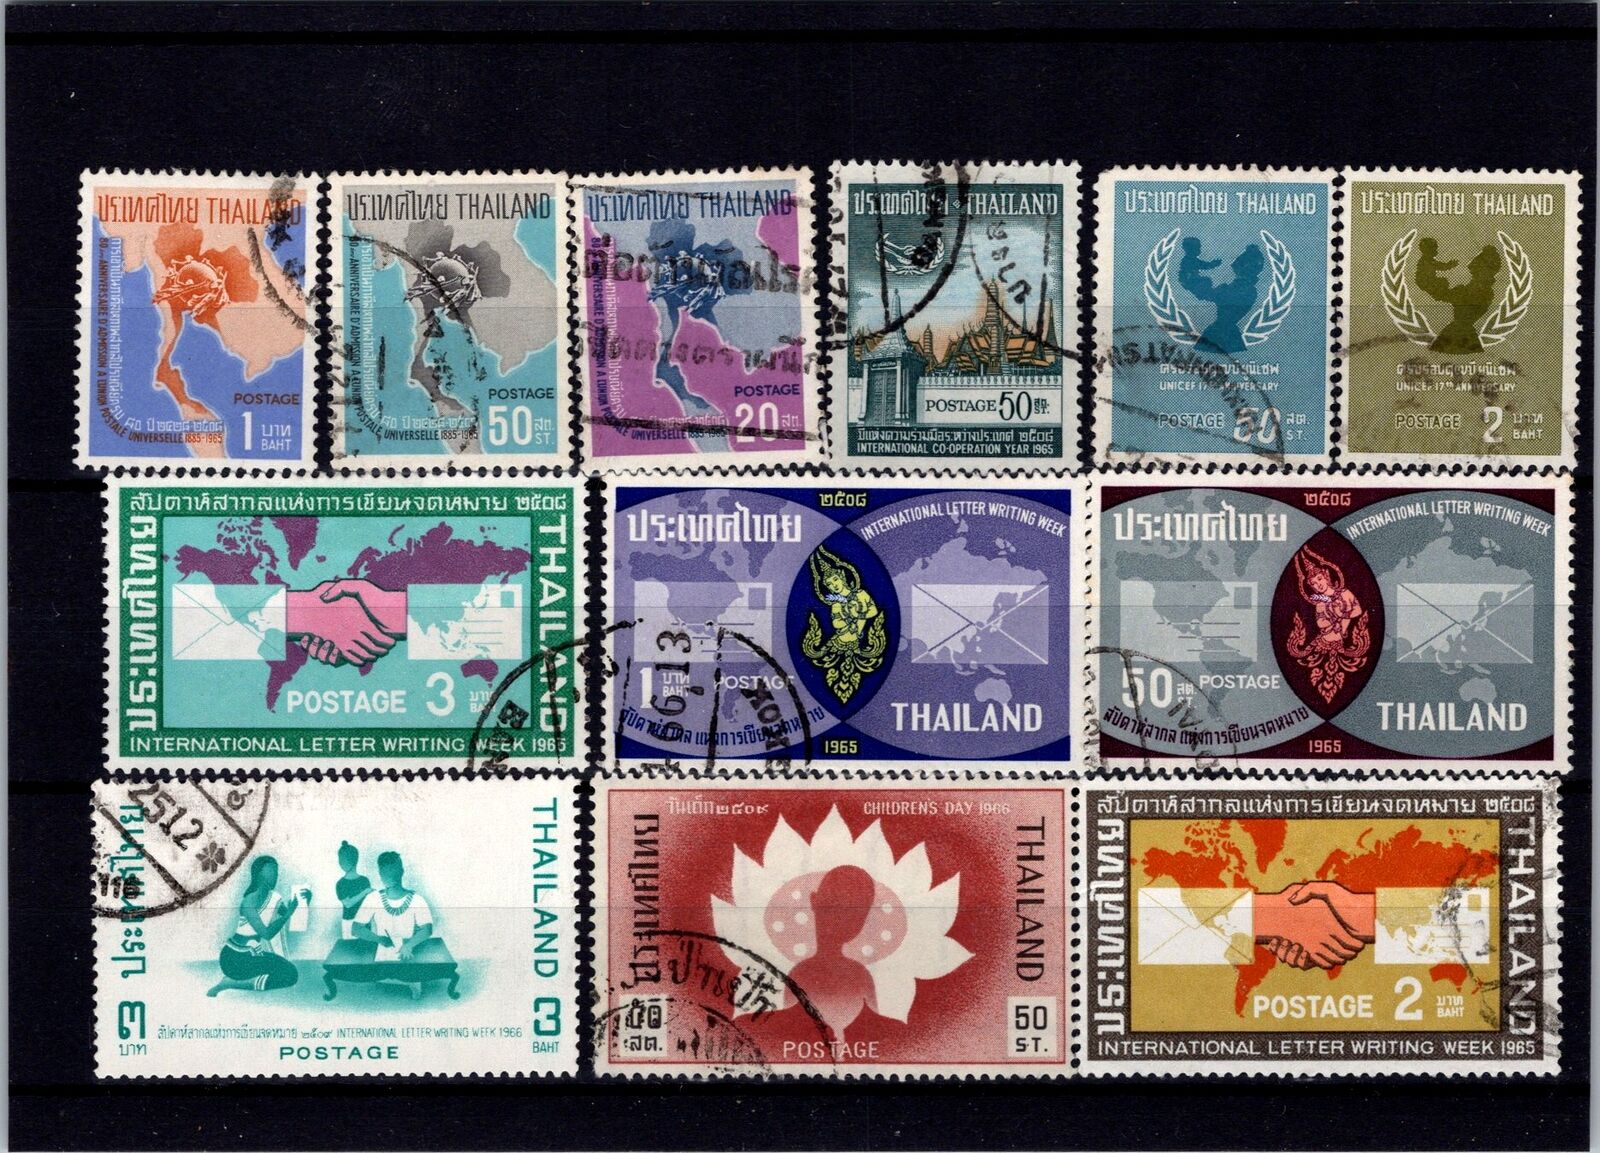 Thailand 12 Used - Few Possible Faults (unchecked) - H33